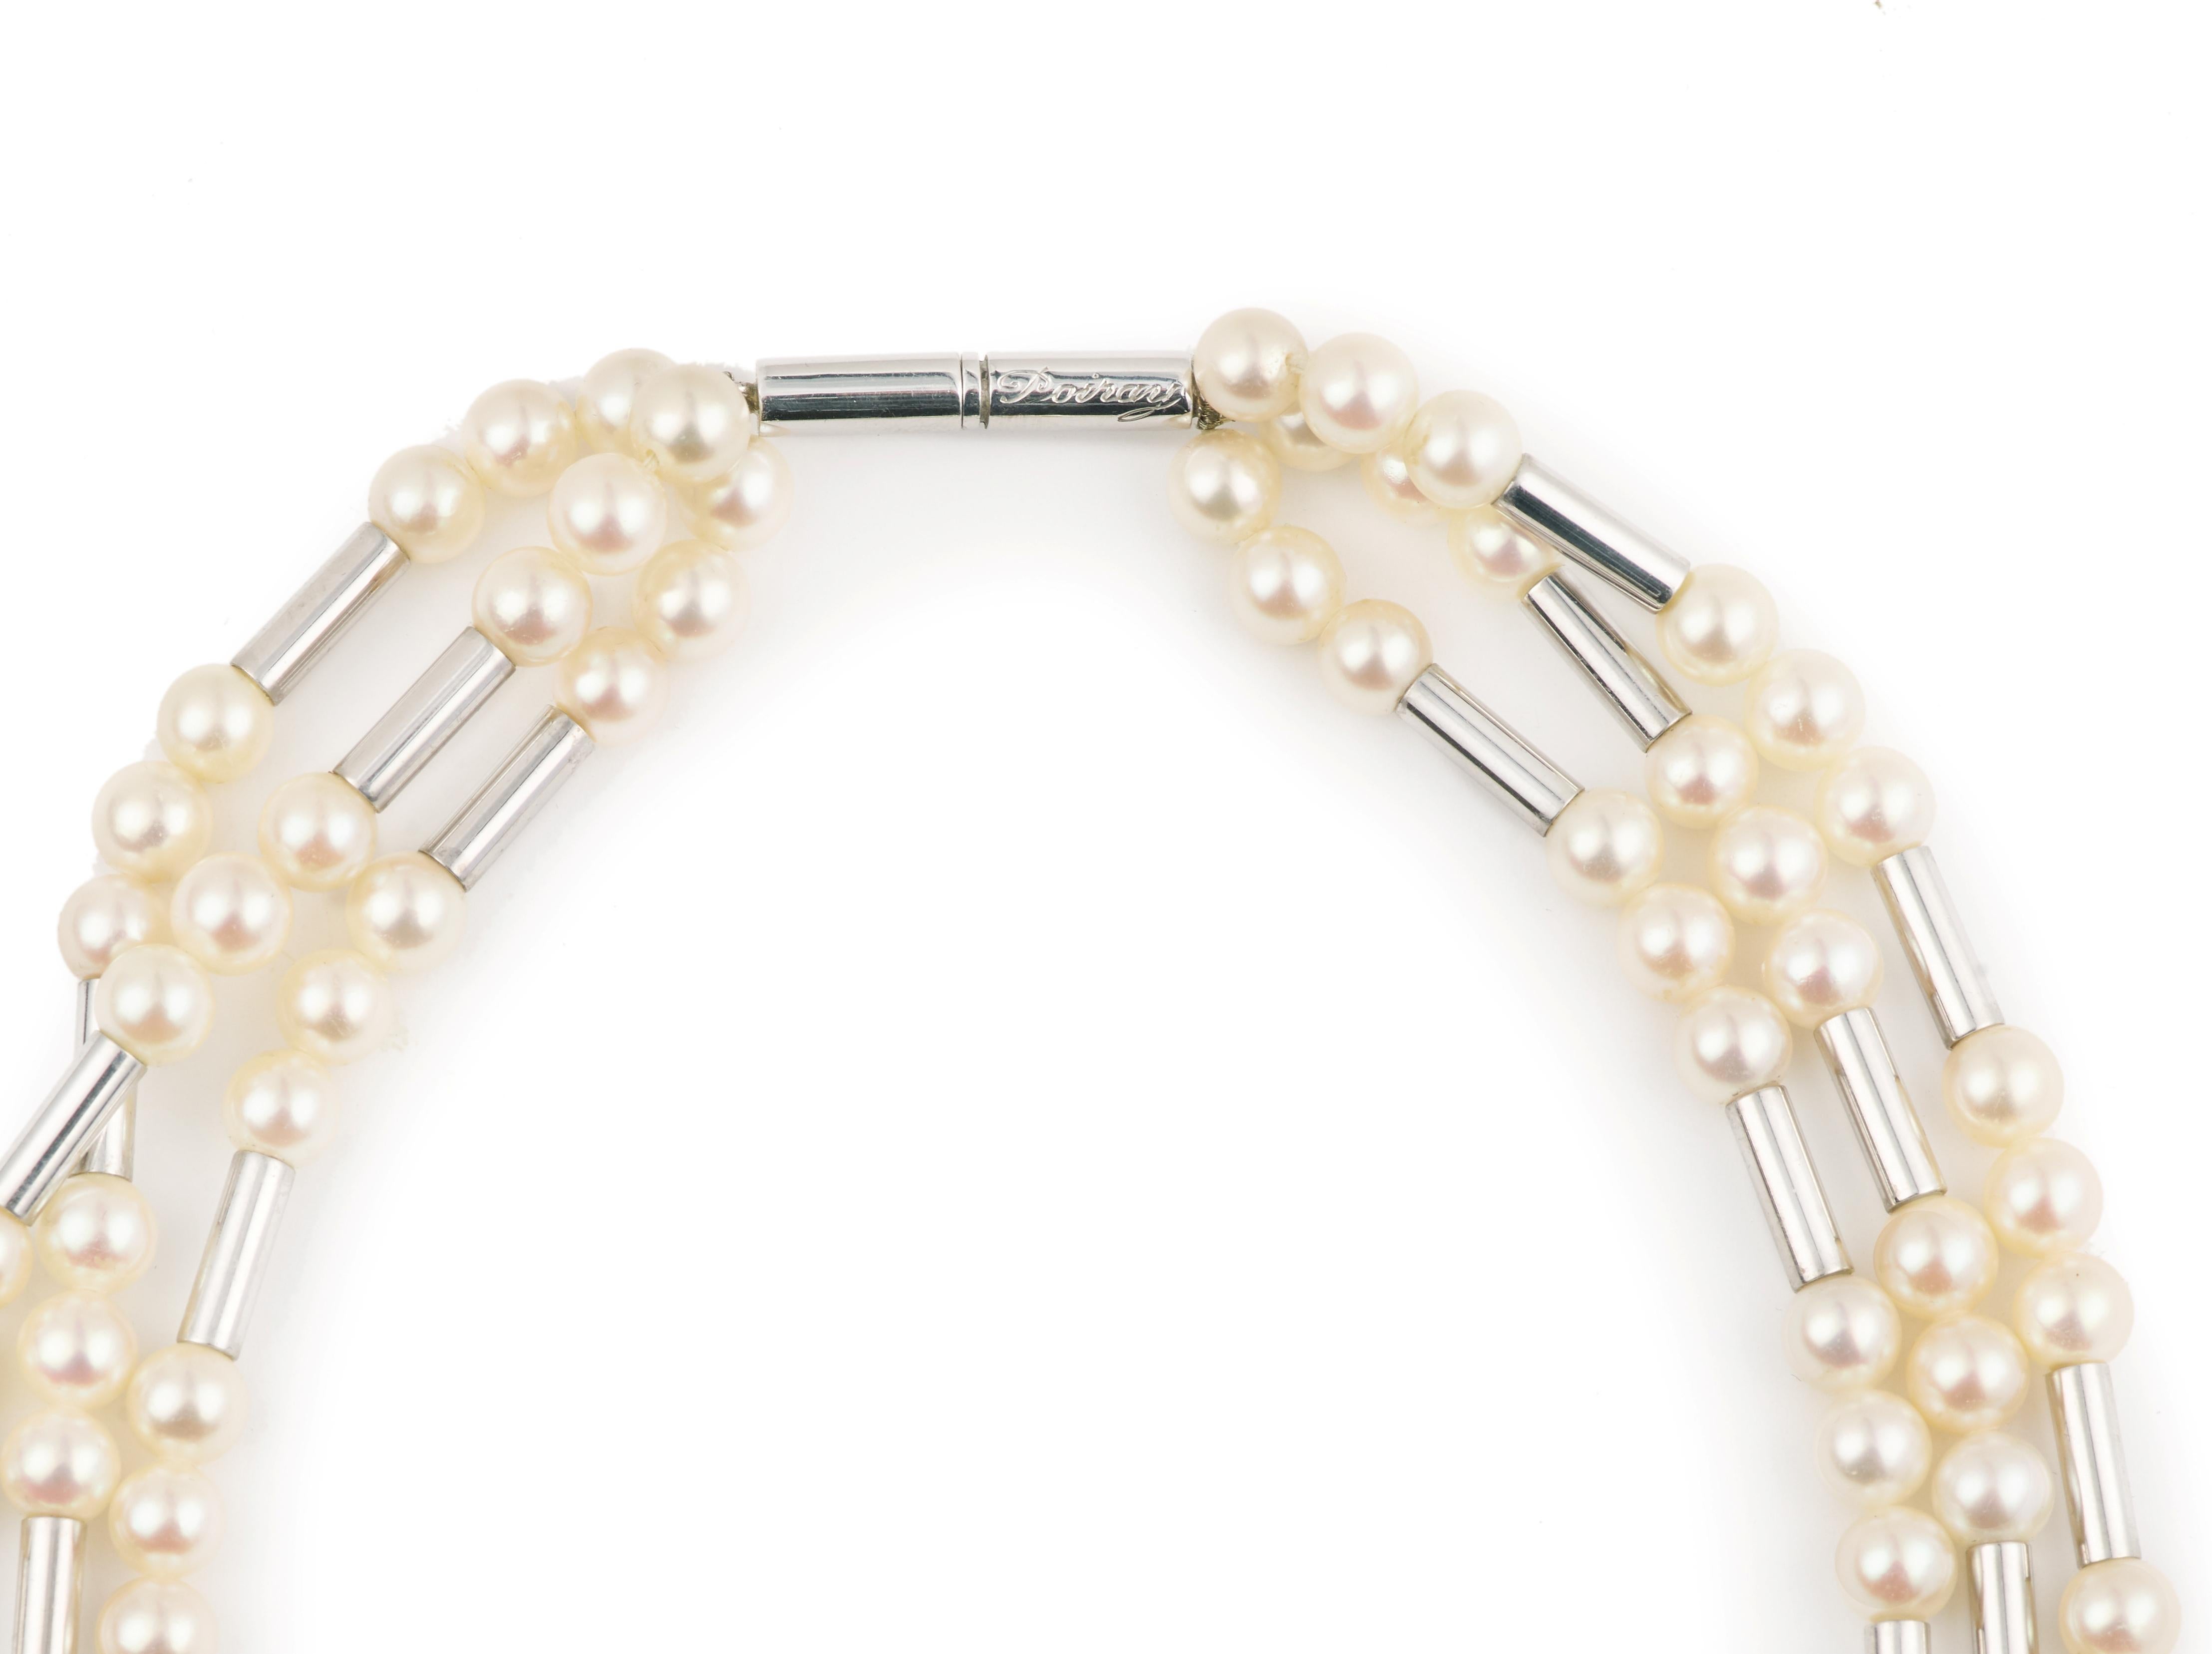 Akoyas pearls necklace and white gold, so called 